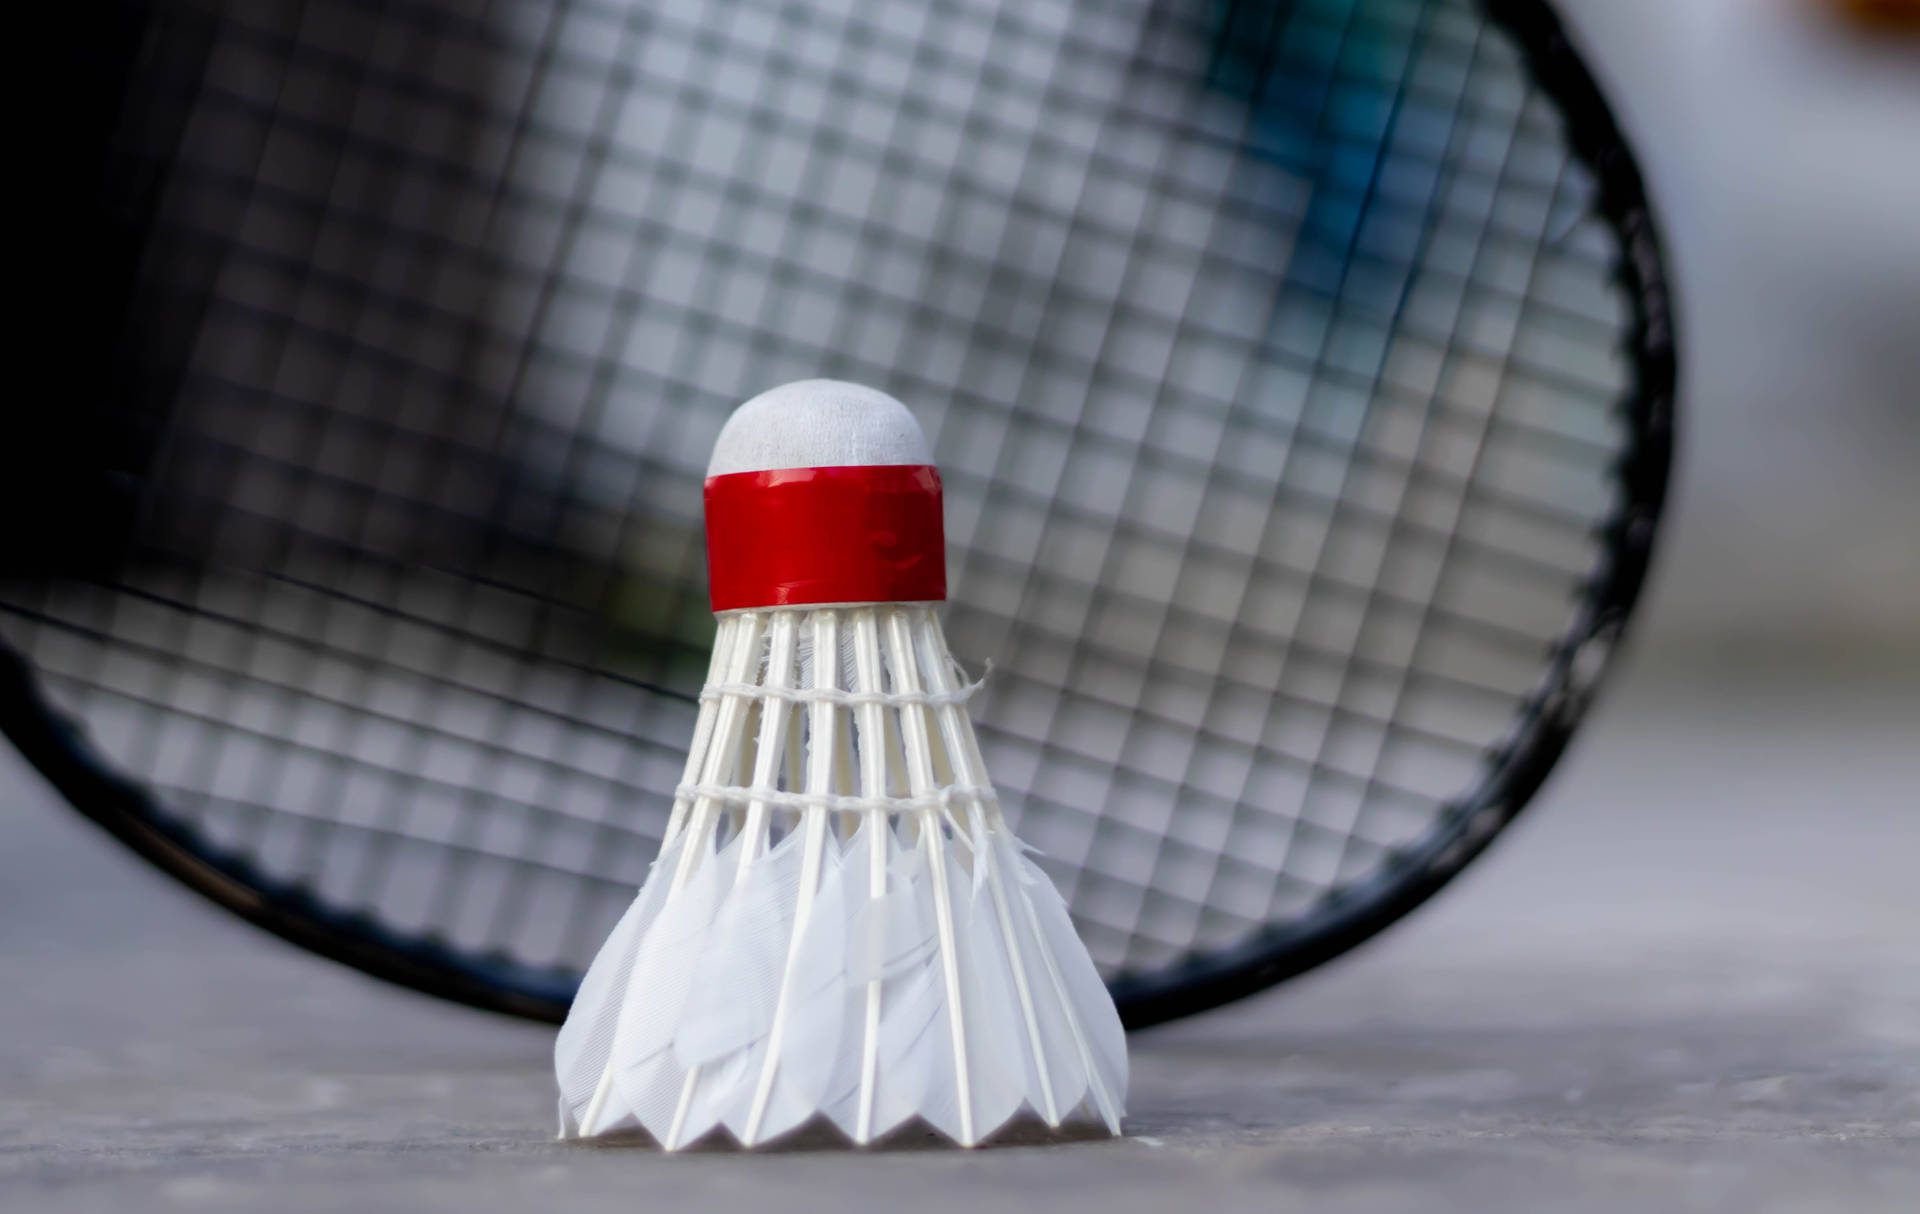 4791X3030 Badminton Wallpaper and Background